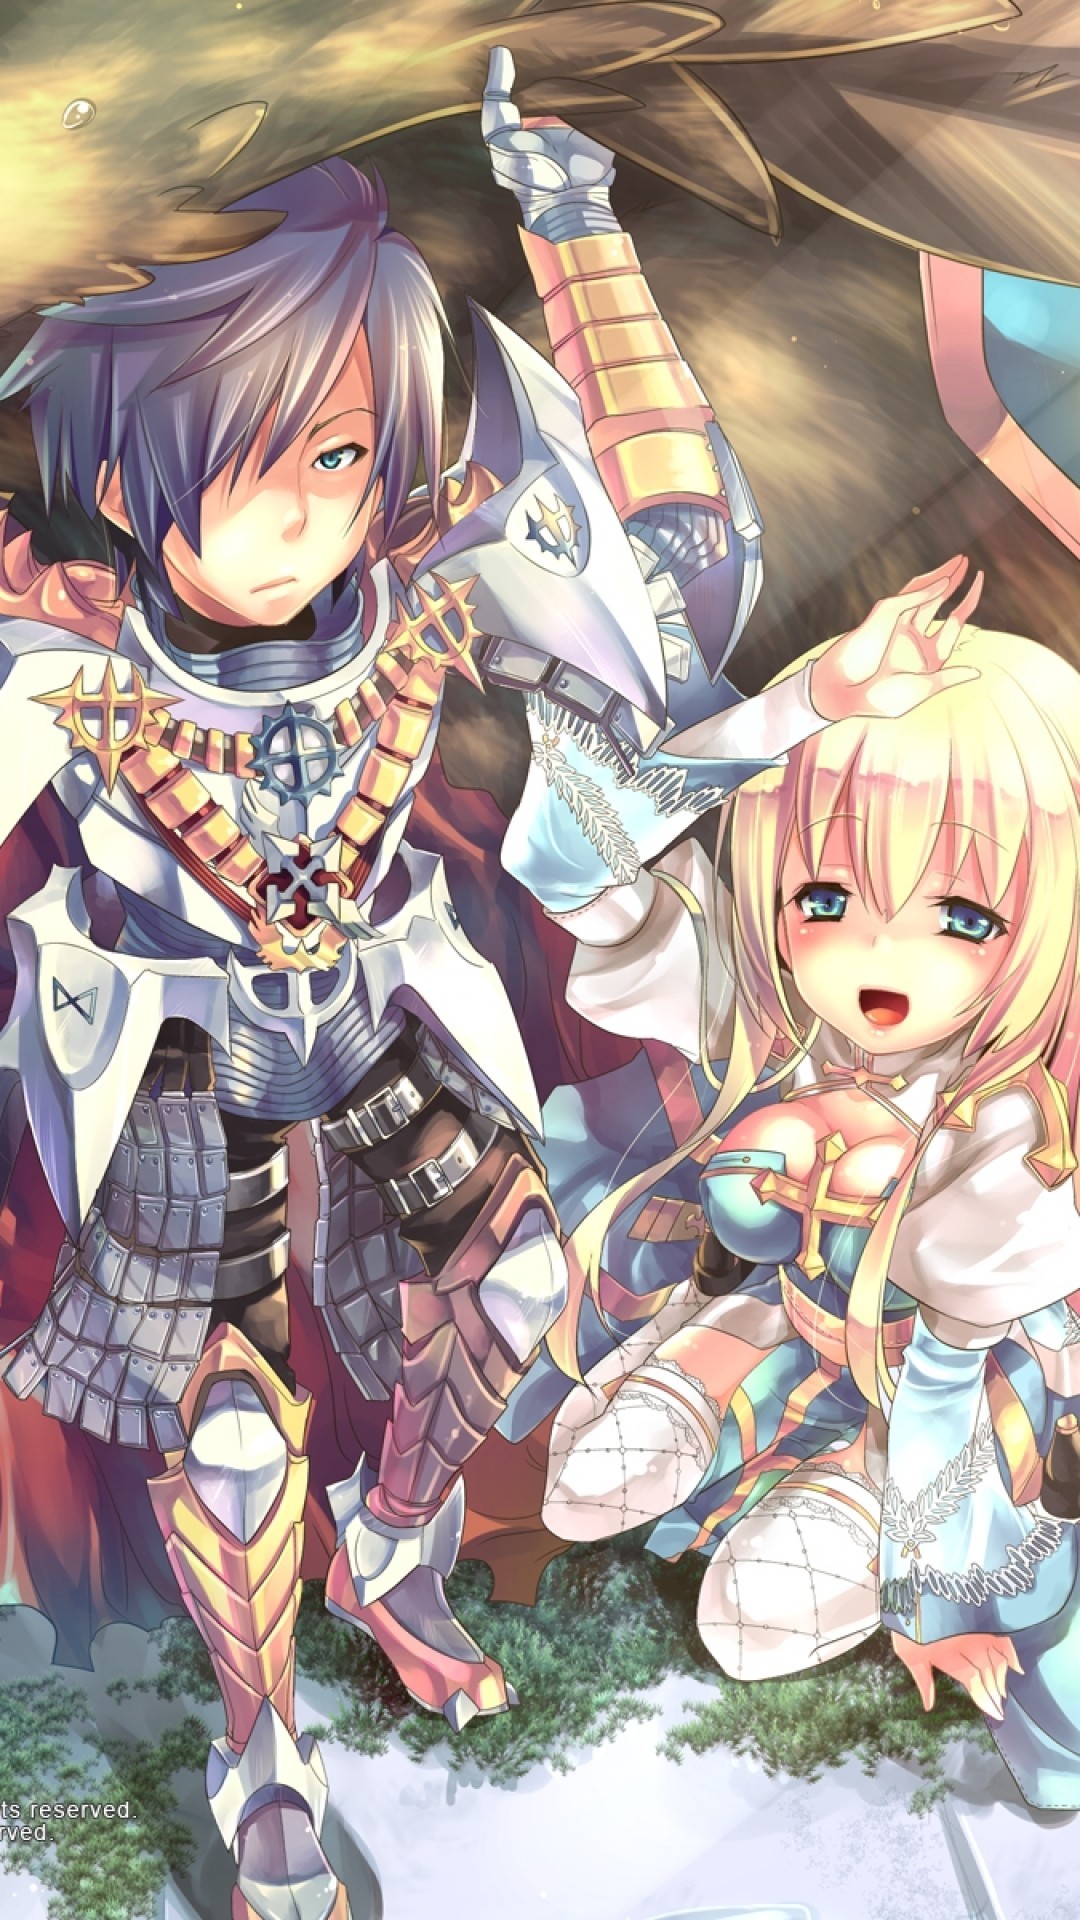 Ragnarok Online, Characters, Armored, Anime Style Games - Ragnarok Online Wallpaper Hd , HD Wallpaper & Backgrounds